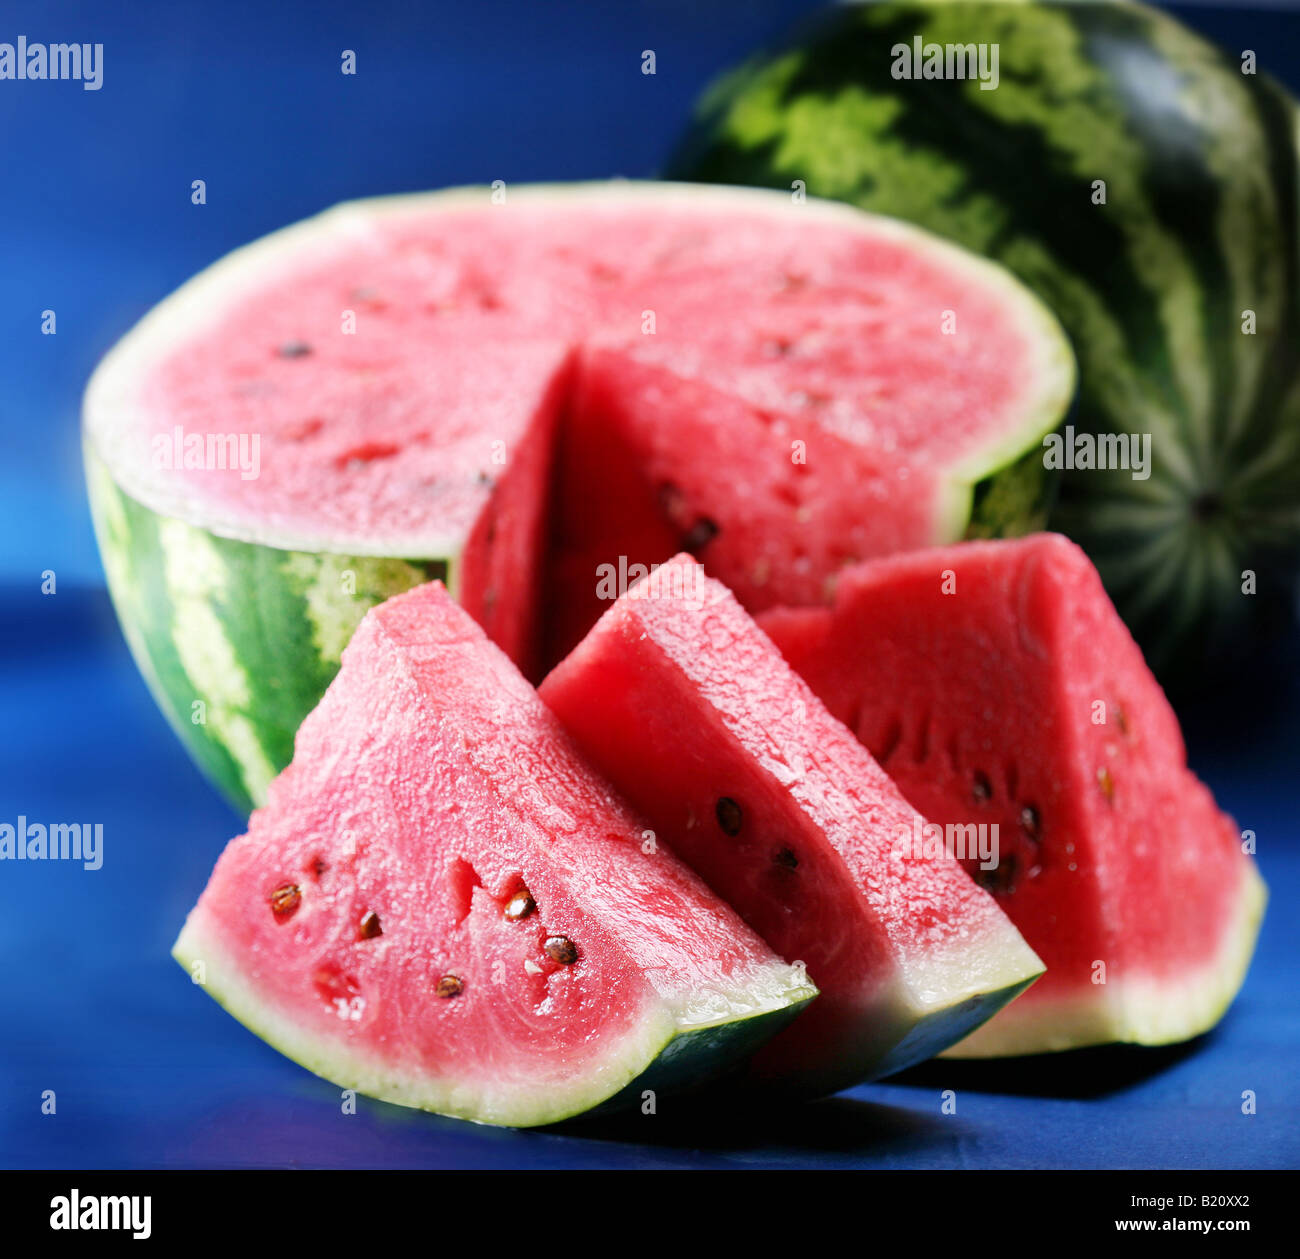 Water melon objects on blue background Stock Photo